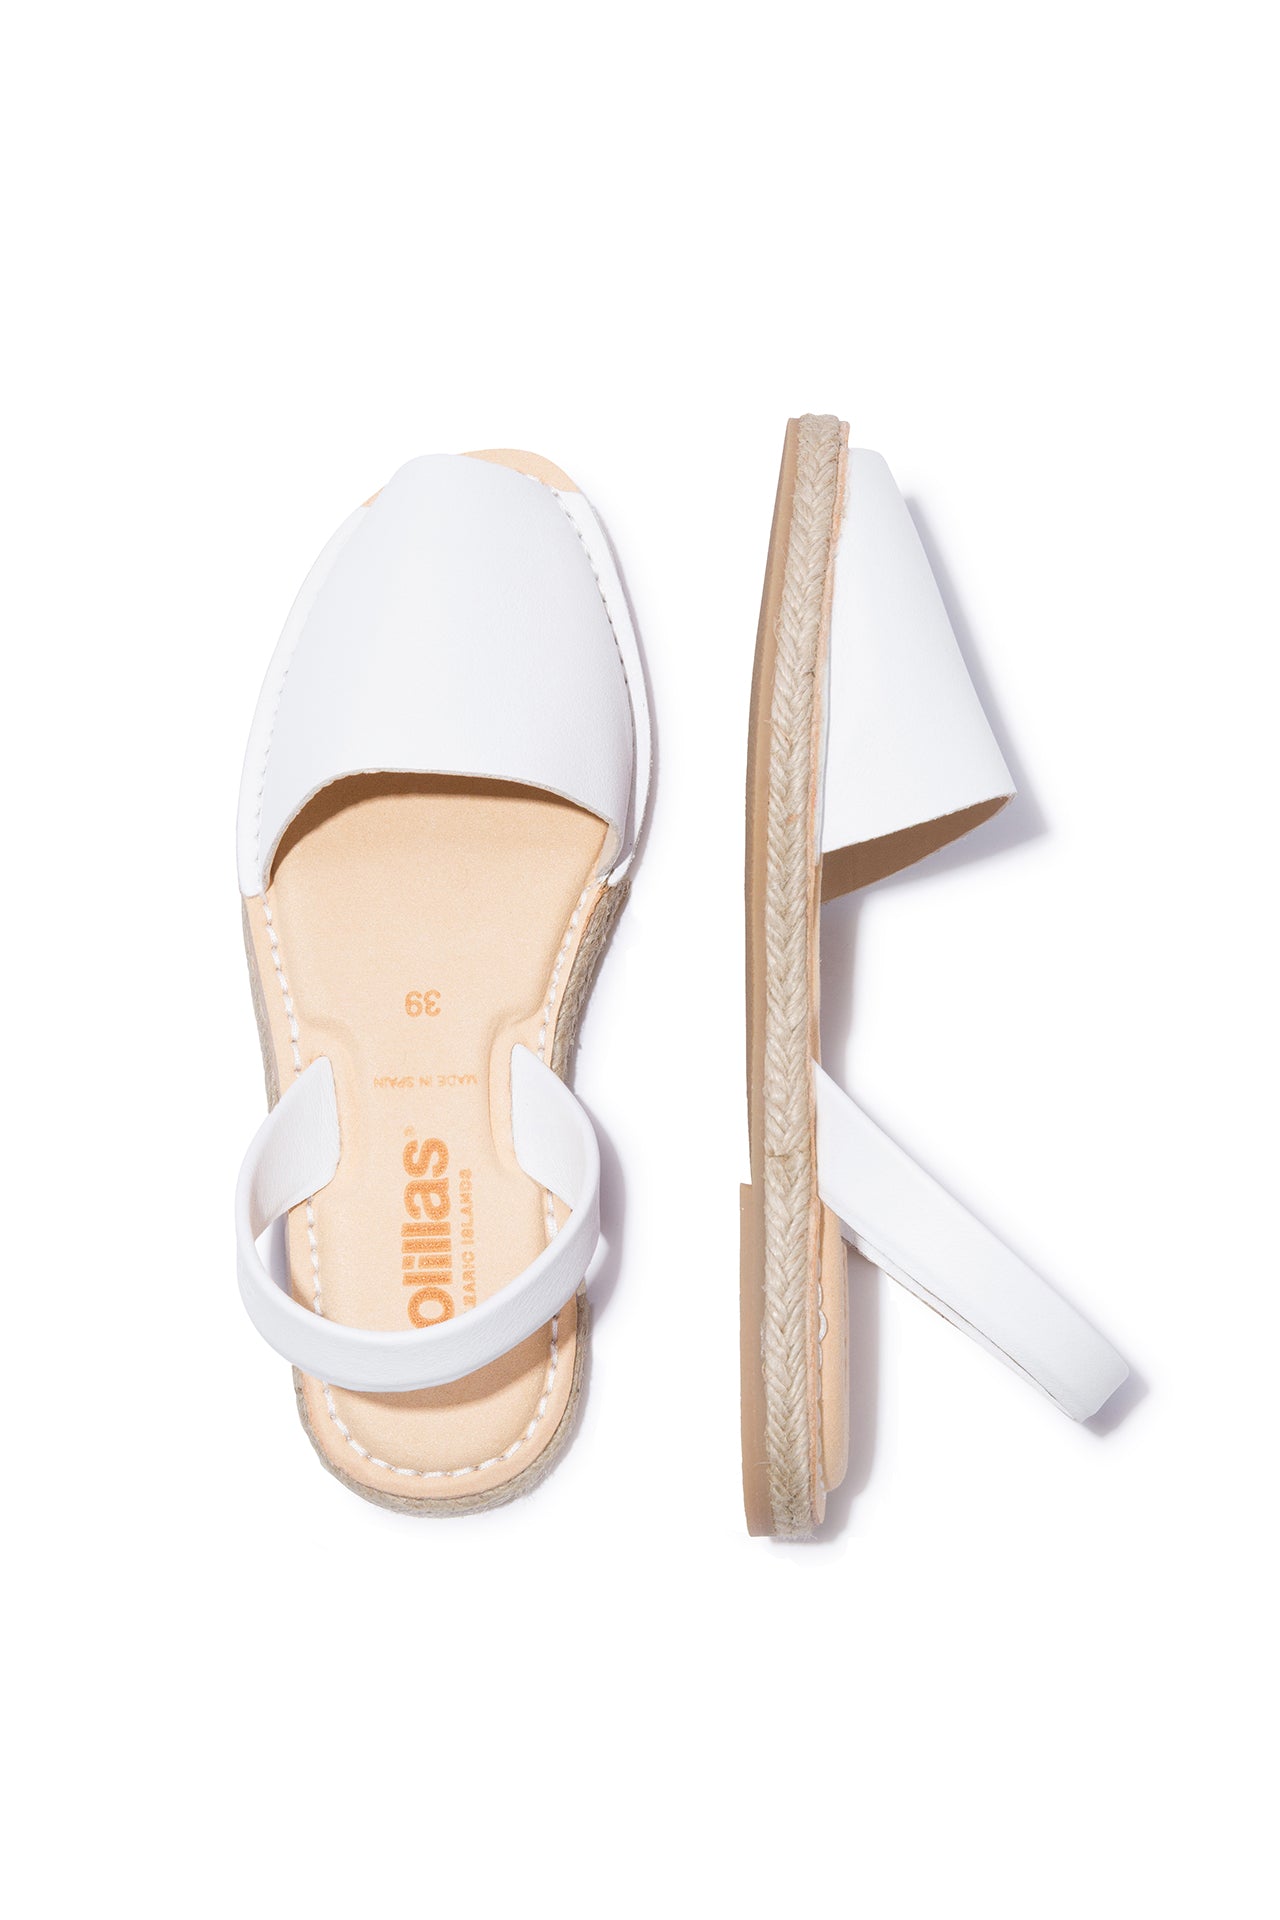 Palido Mimoso - Espadrille Menorcan Sandals in White Leather with Padded Insole